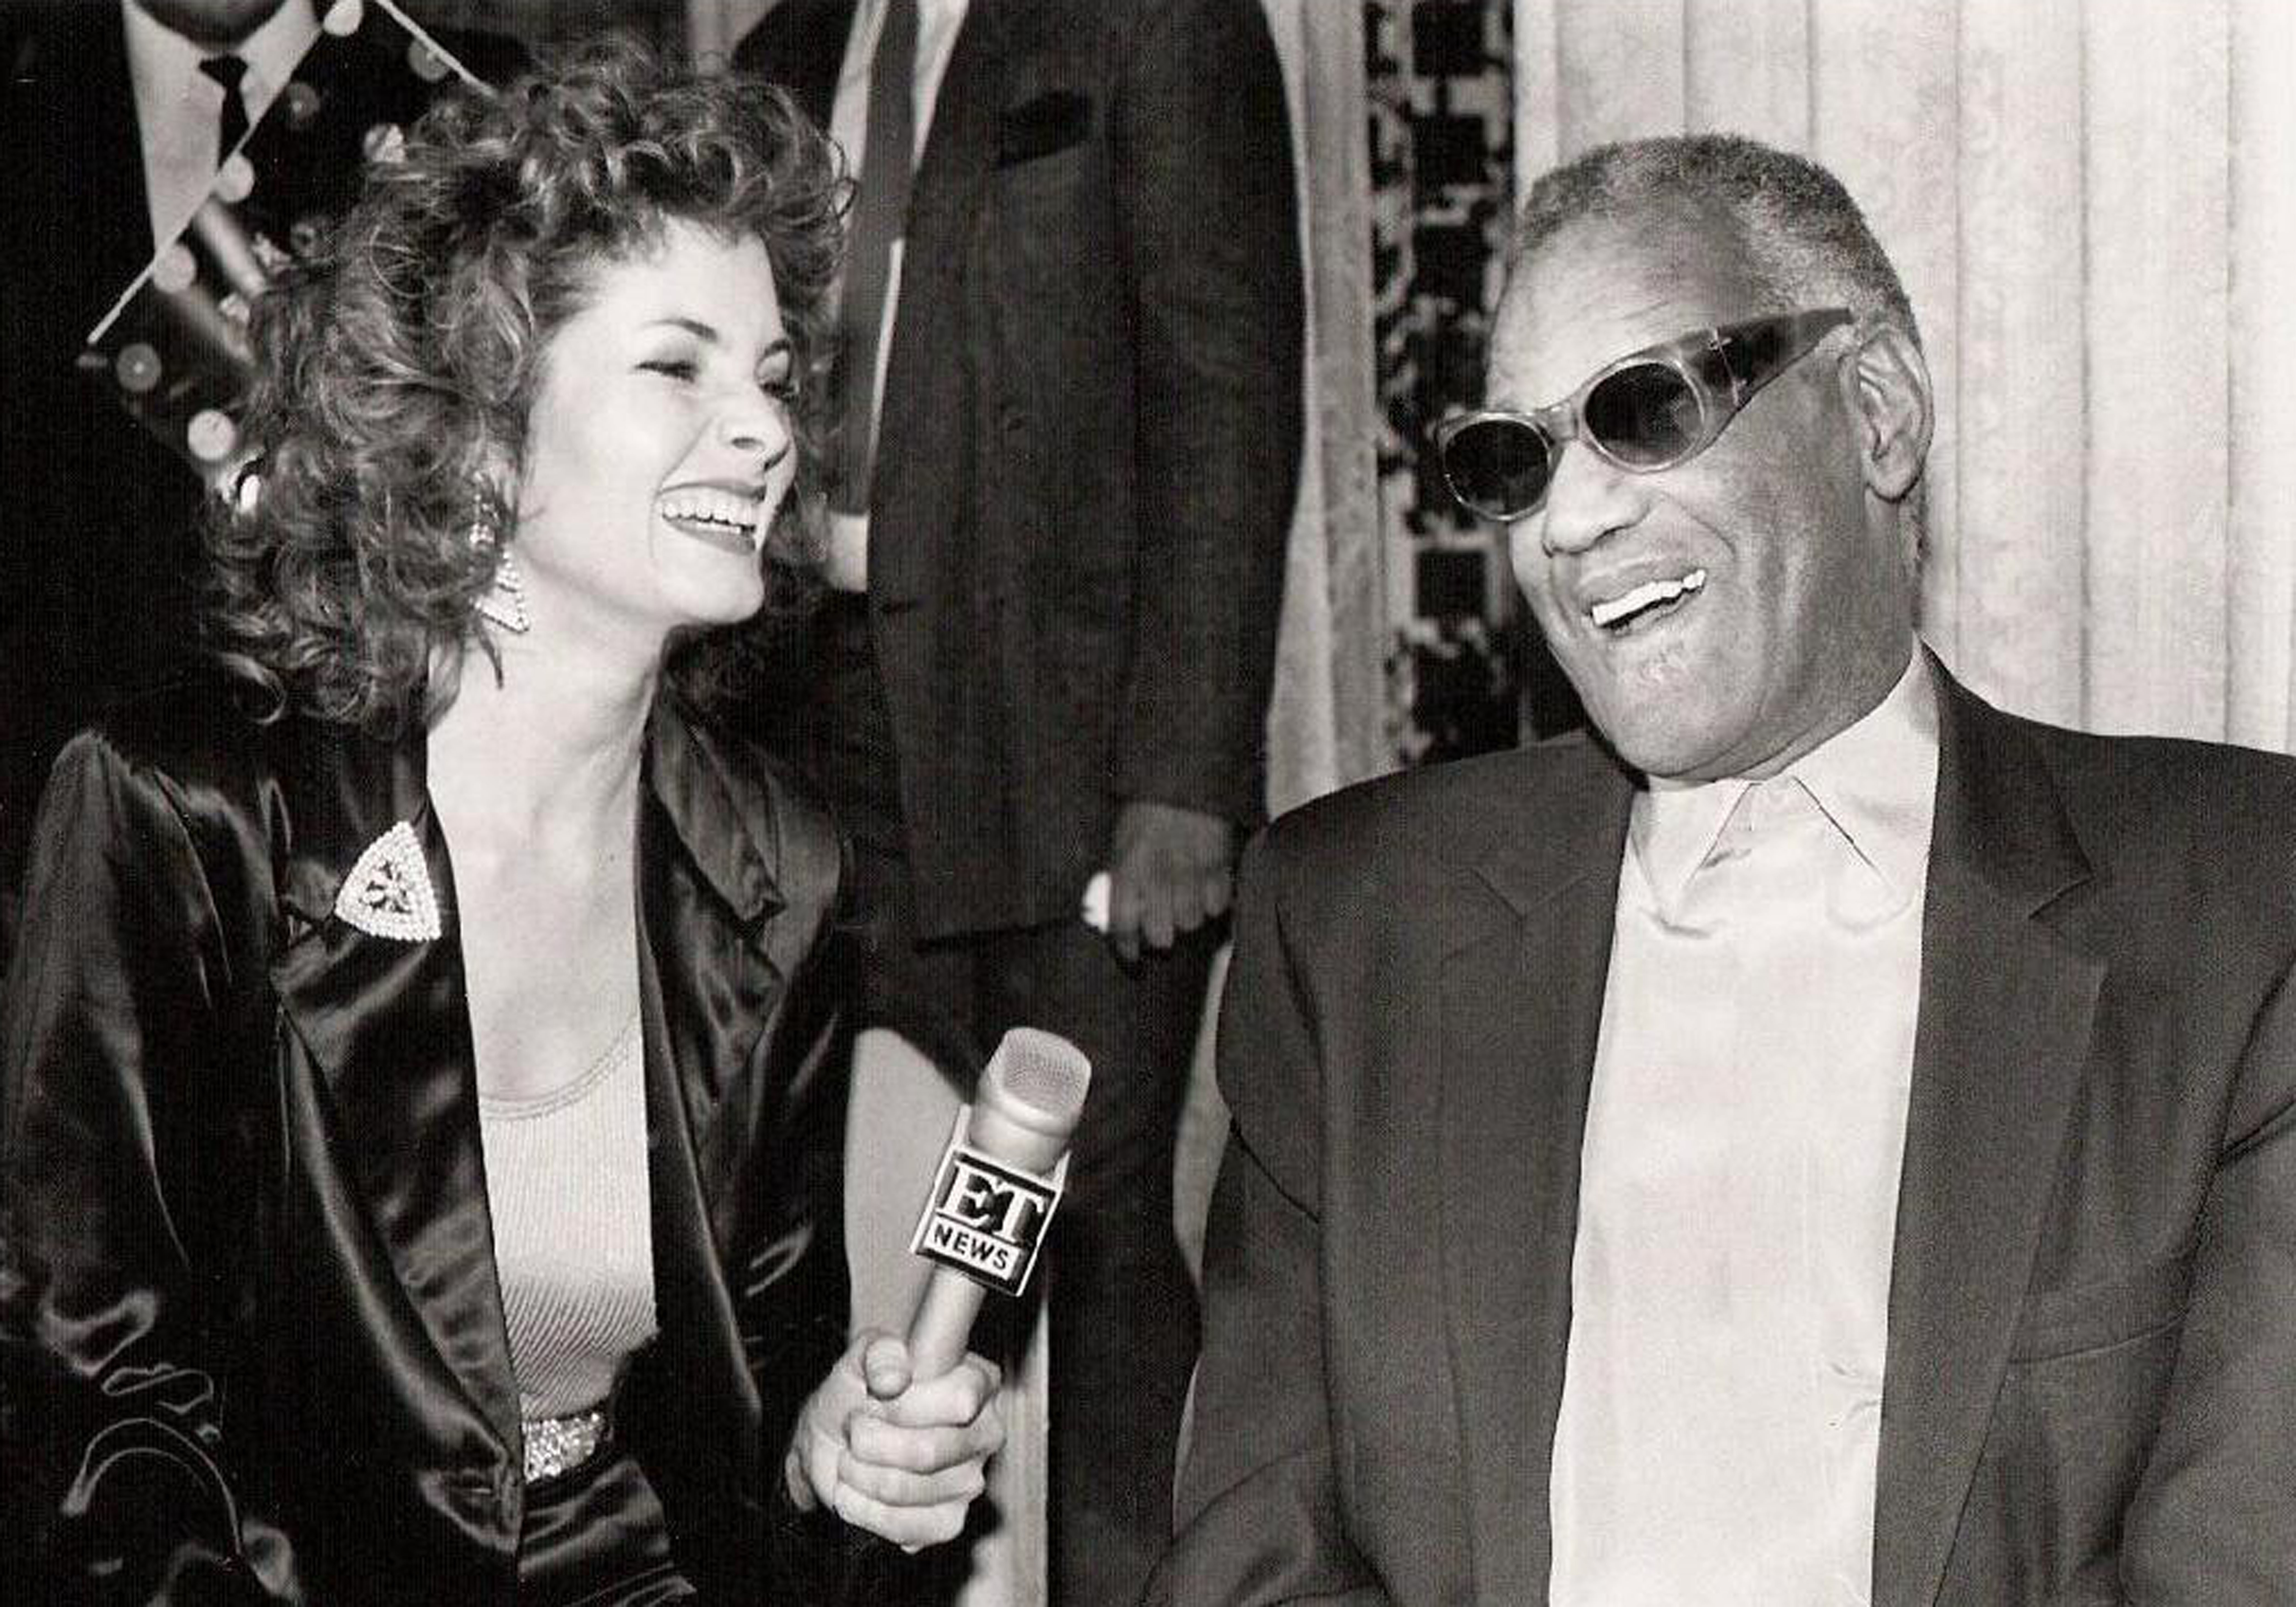 Dixie Whatley shares a laugh with Ray Charlesat his innitiation into the Rock and Roll Hall of Fame.